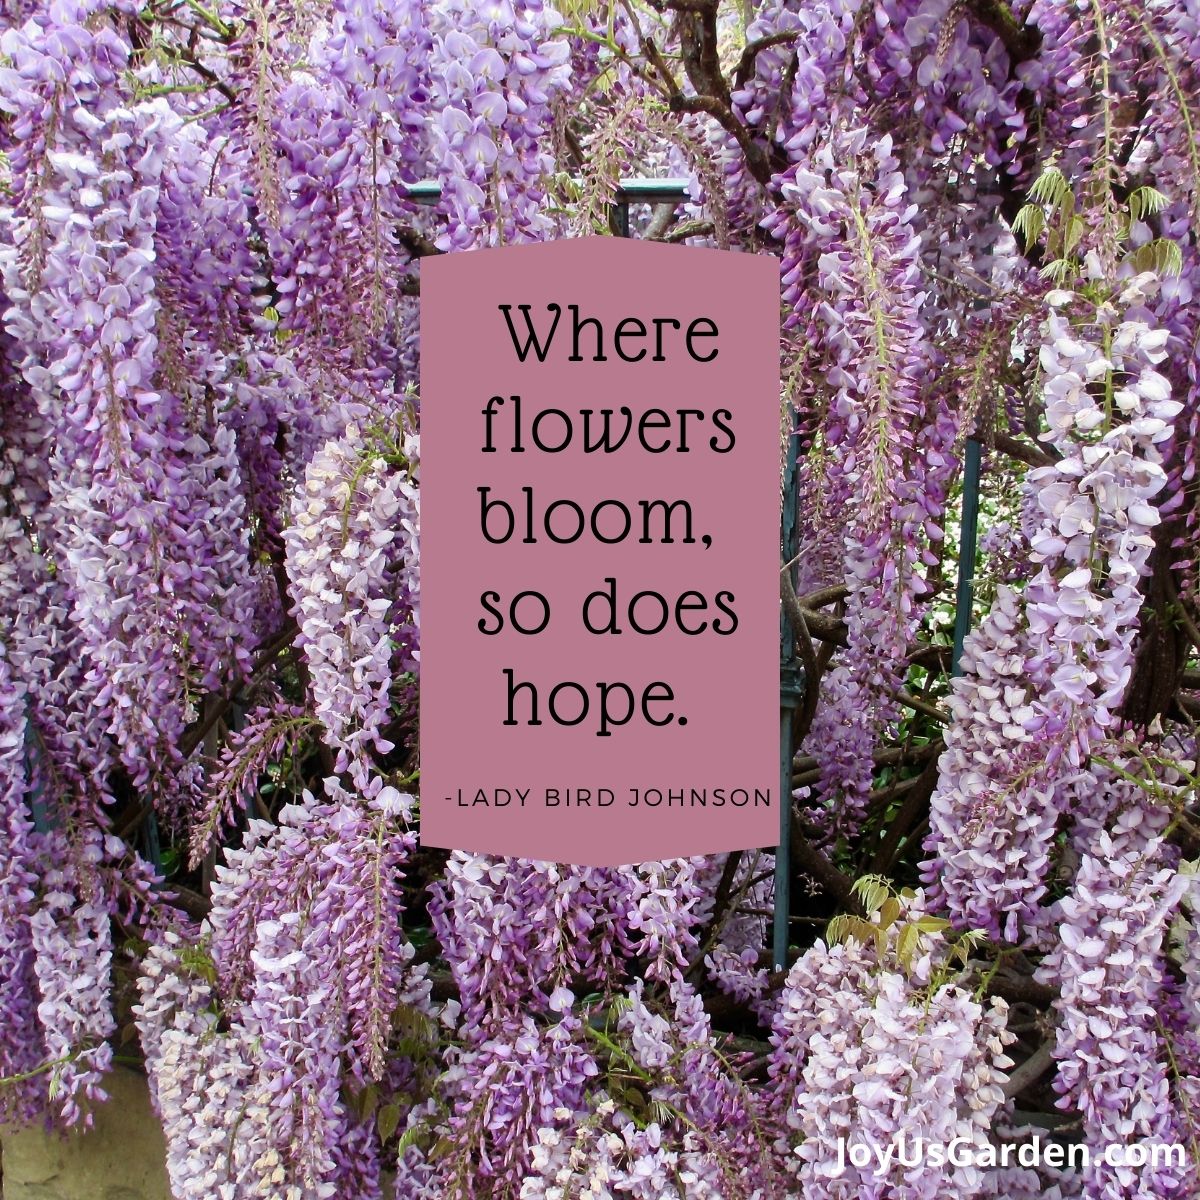 purple wisteria background text reads  Where flowers bloom, so does hope. — Lady Bird Johnson